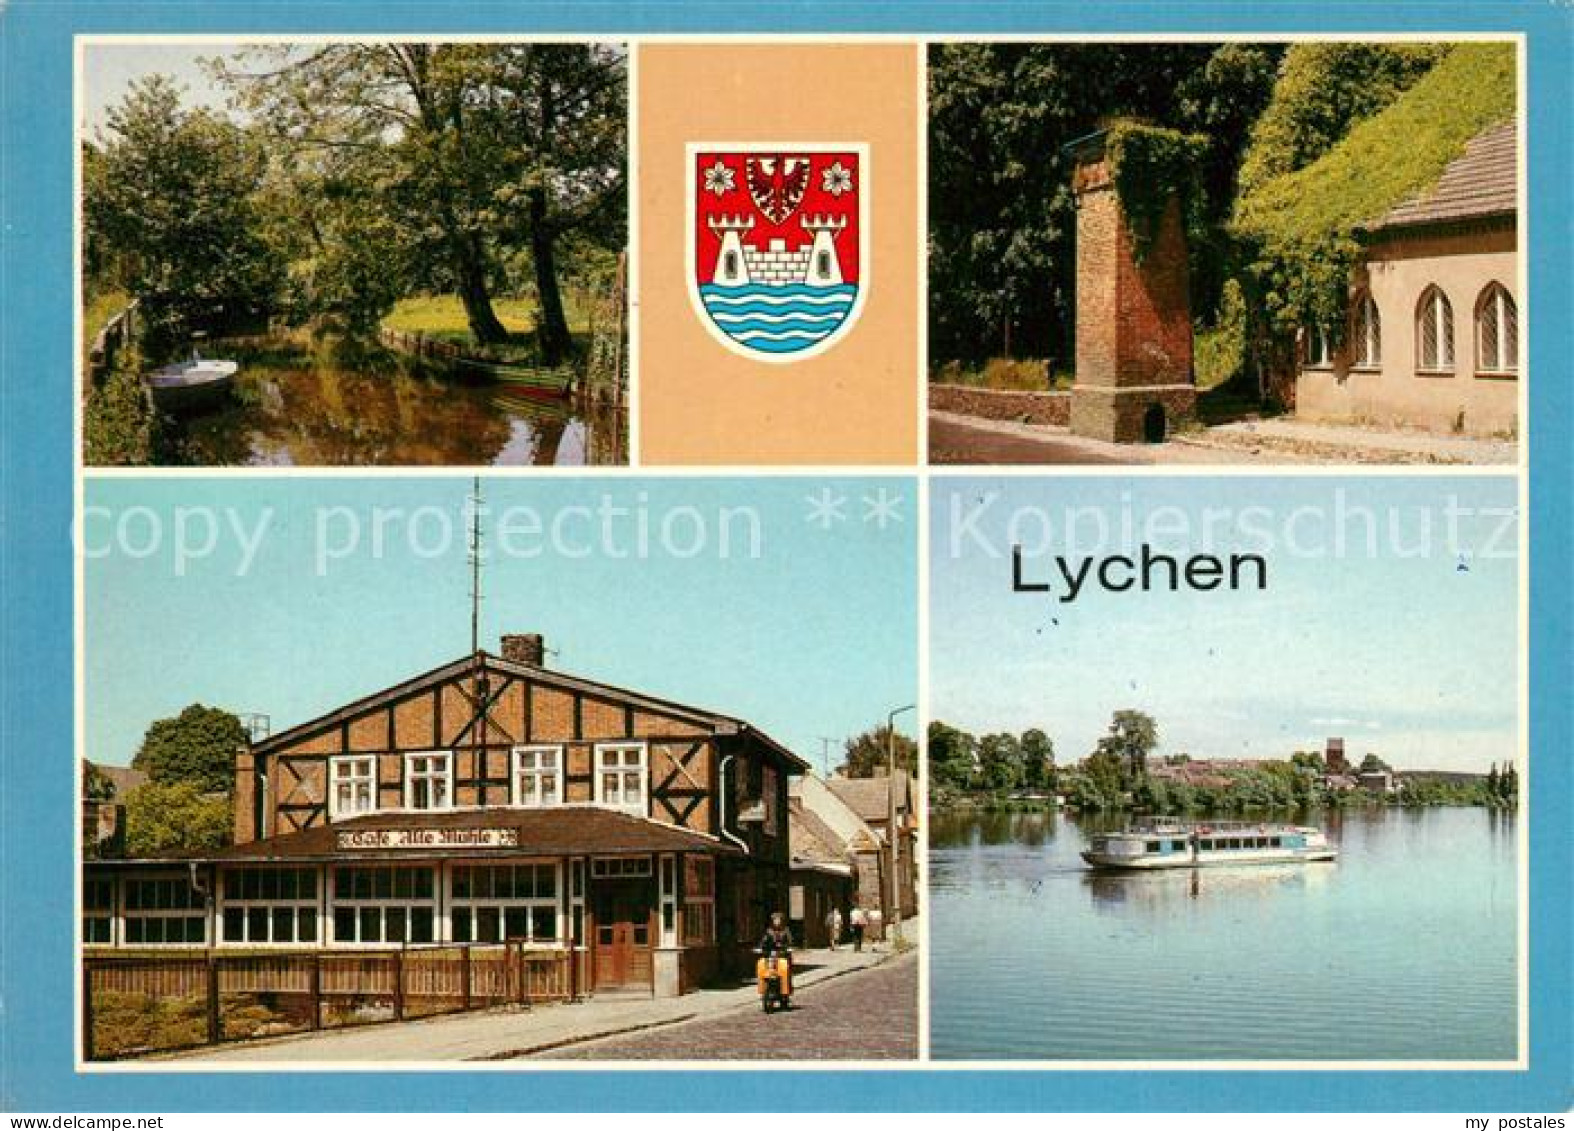 73148411 Lychen Muehlbach Fuerstenberger Tor Cafe Alte Muehle MS Moeve Stadtsee  - Lychen